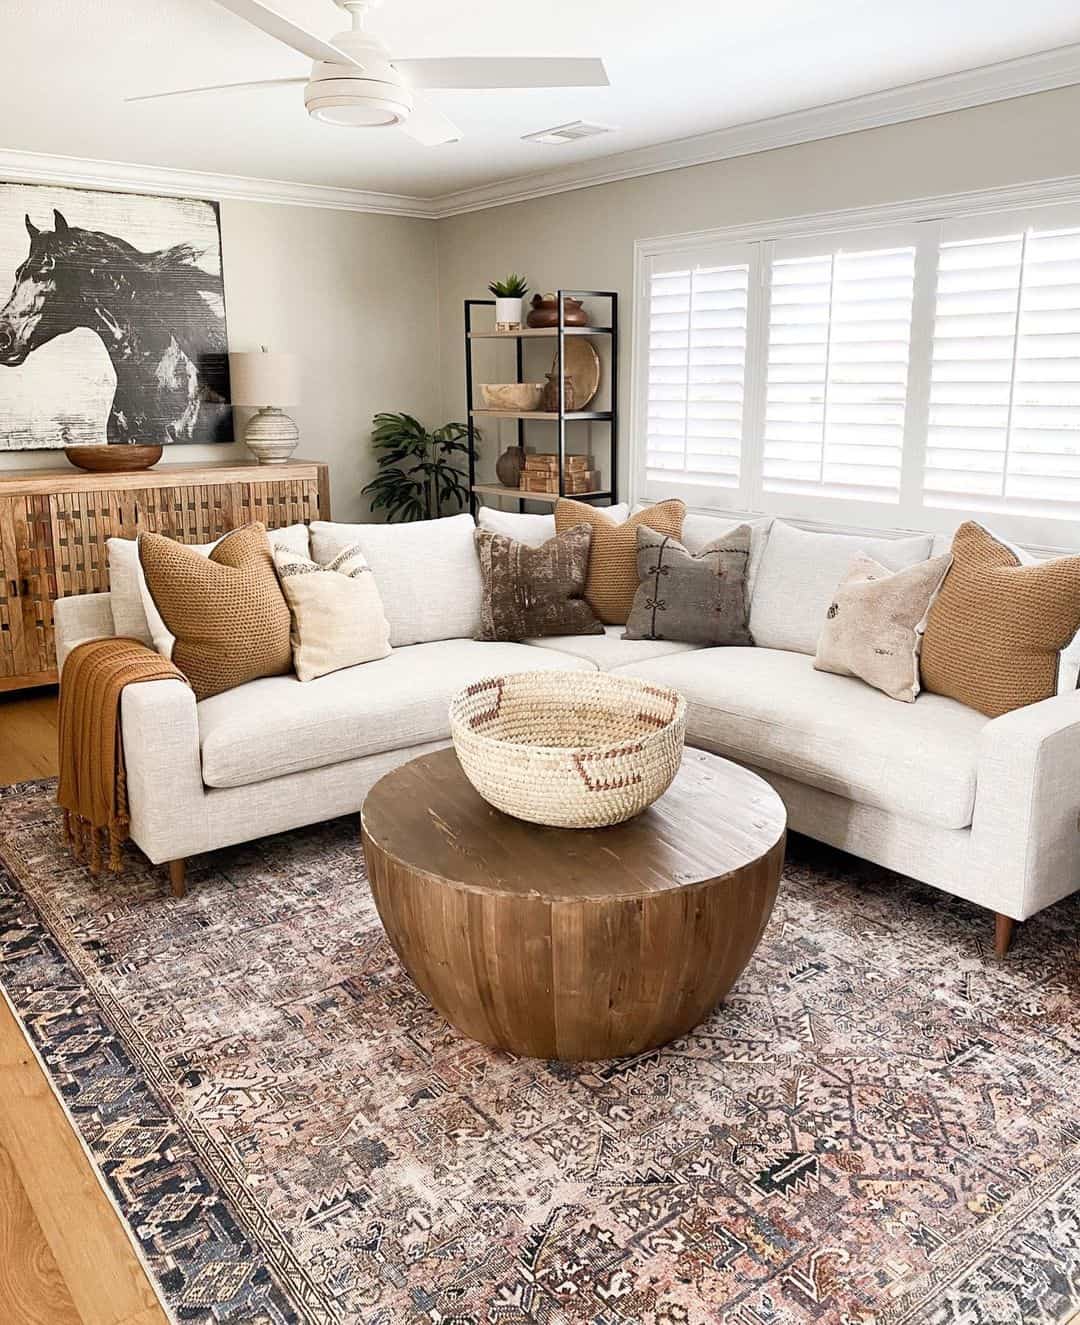 https://www.soulandlane.com/wp-content/uploads/2022/09/Off-White-Sectional-with-Neutral-Pillows.jpg